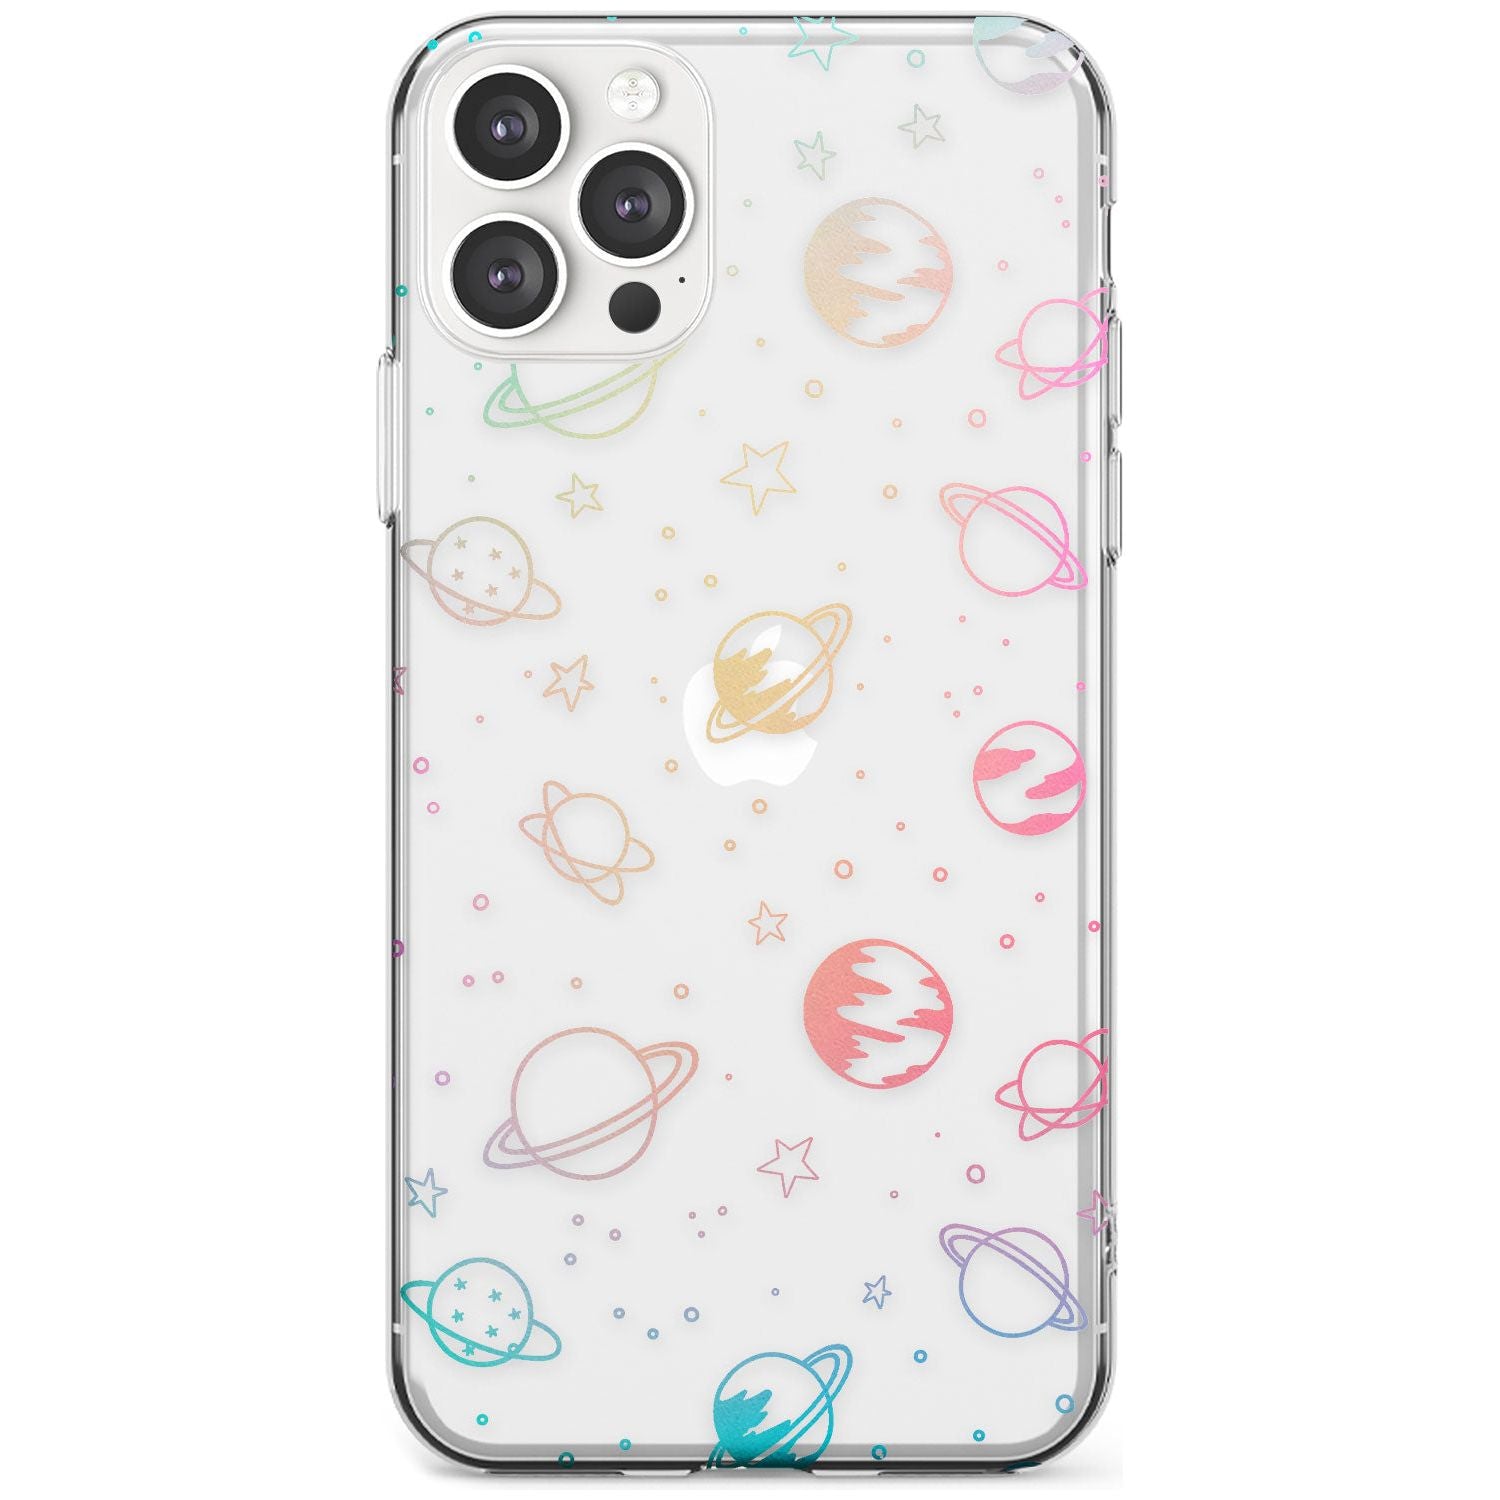 Outer Space Outlines: Pastels on Clear Black Impact Phone Case for iPhone 11 Pro Max